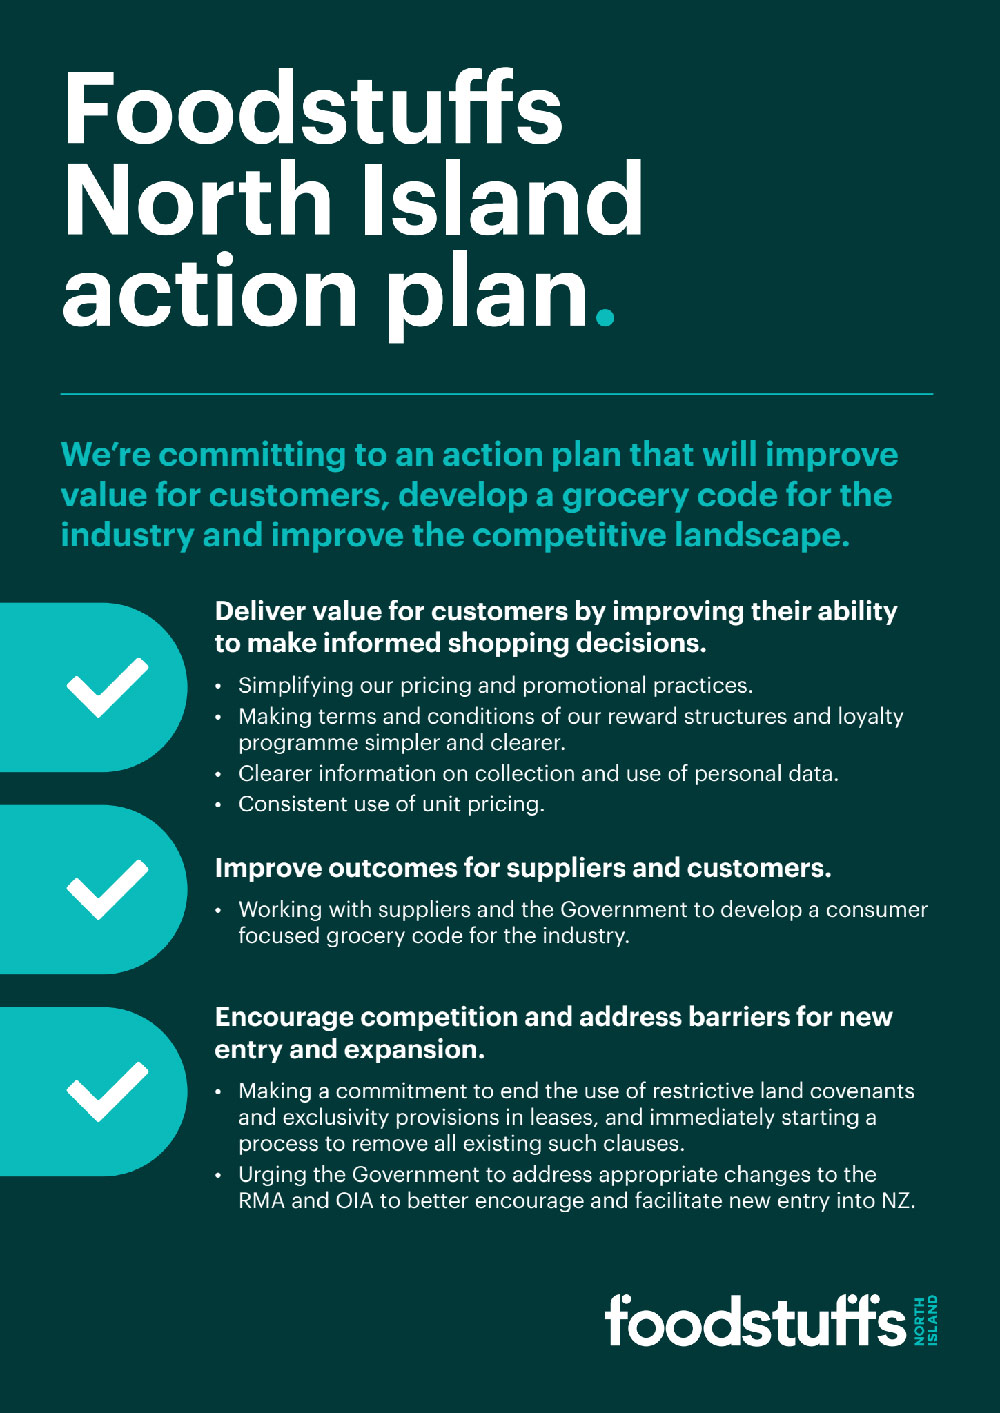 Foodstuffs North Island action plan - We're committing to an action plan that will improve value for customers, develop a grocery code for the industry and improve the competitive landscape